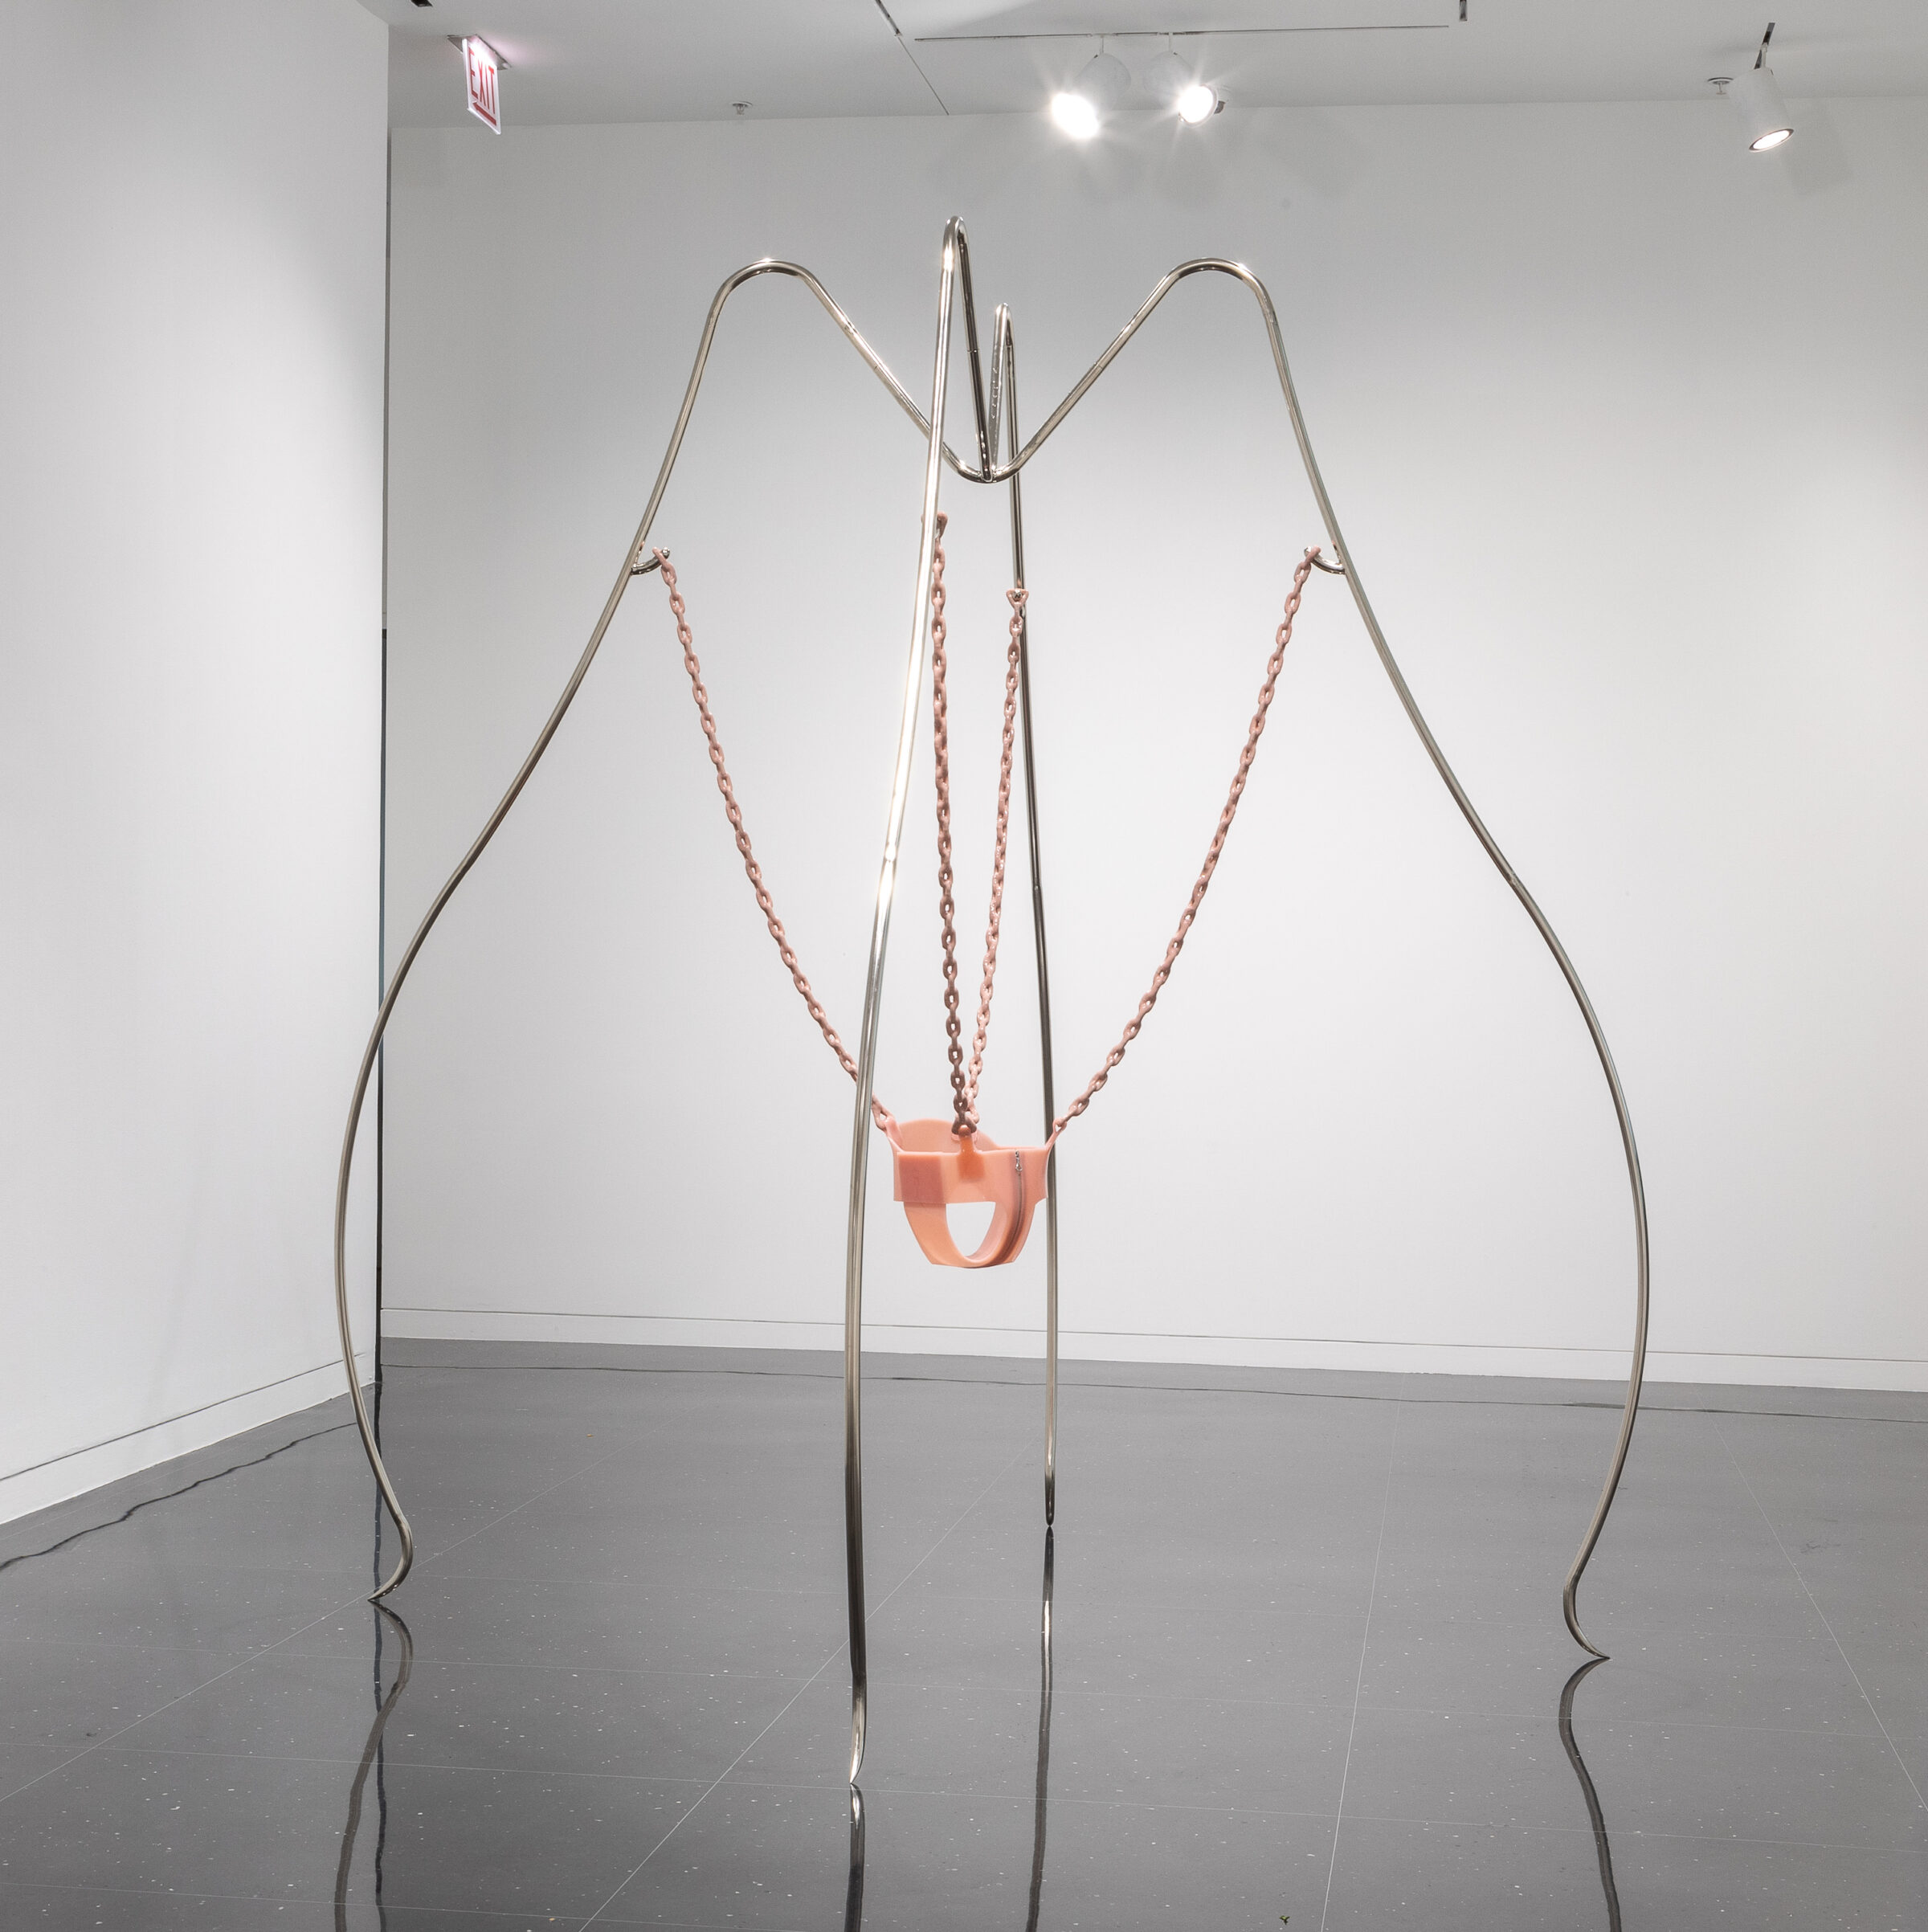 A white gallery with a steel and latex sculpture installed in the middle. The latex component is shaped into a toddler's swing and is suspended by four long steel supports bent like insect legs.